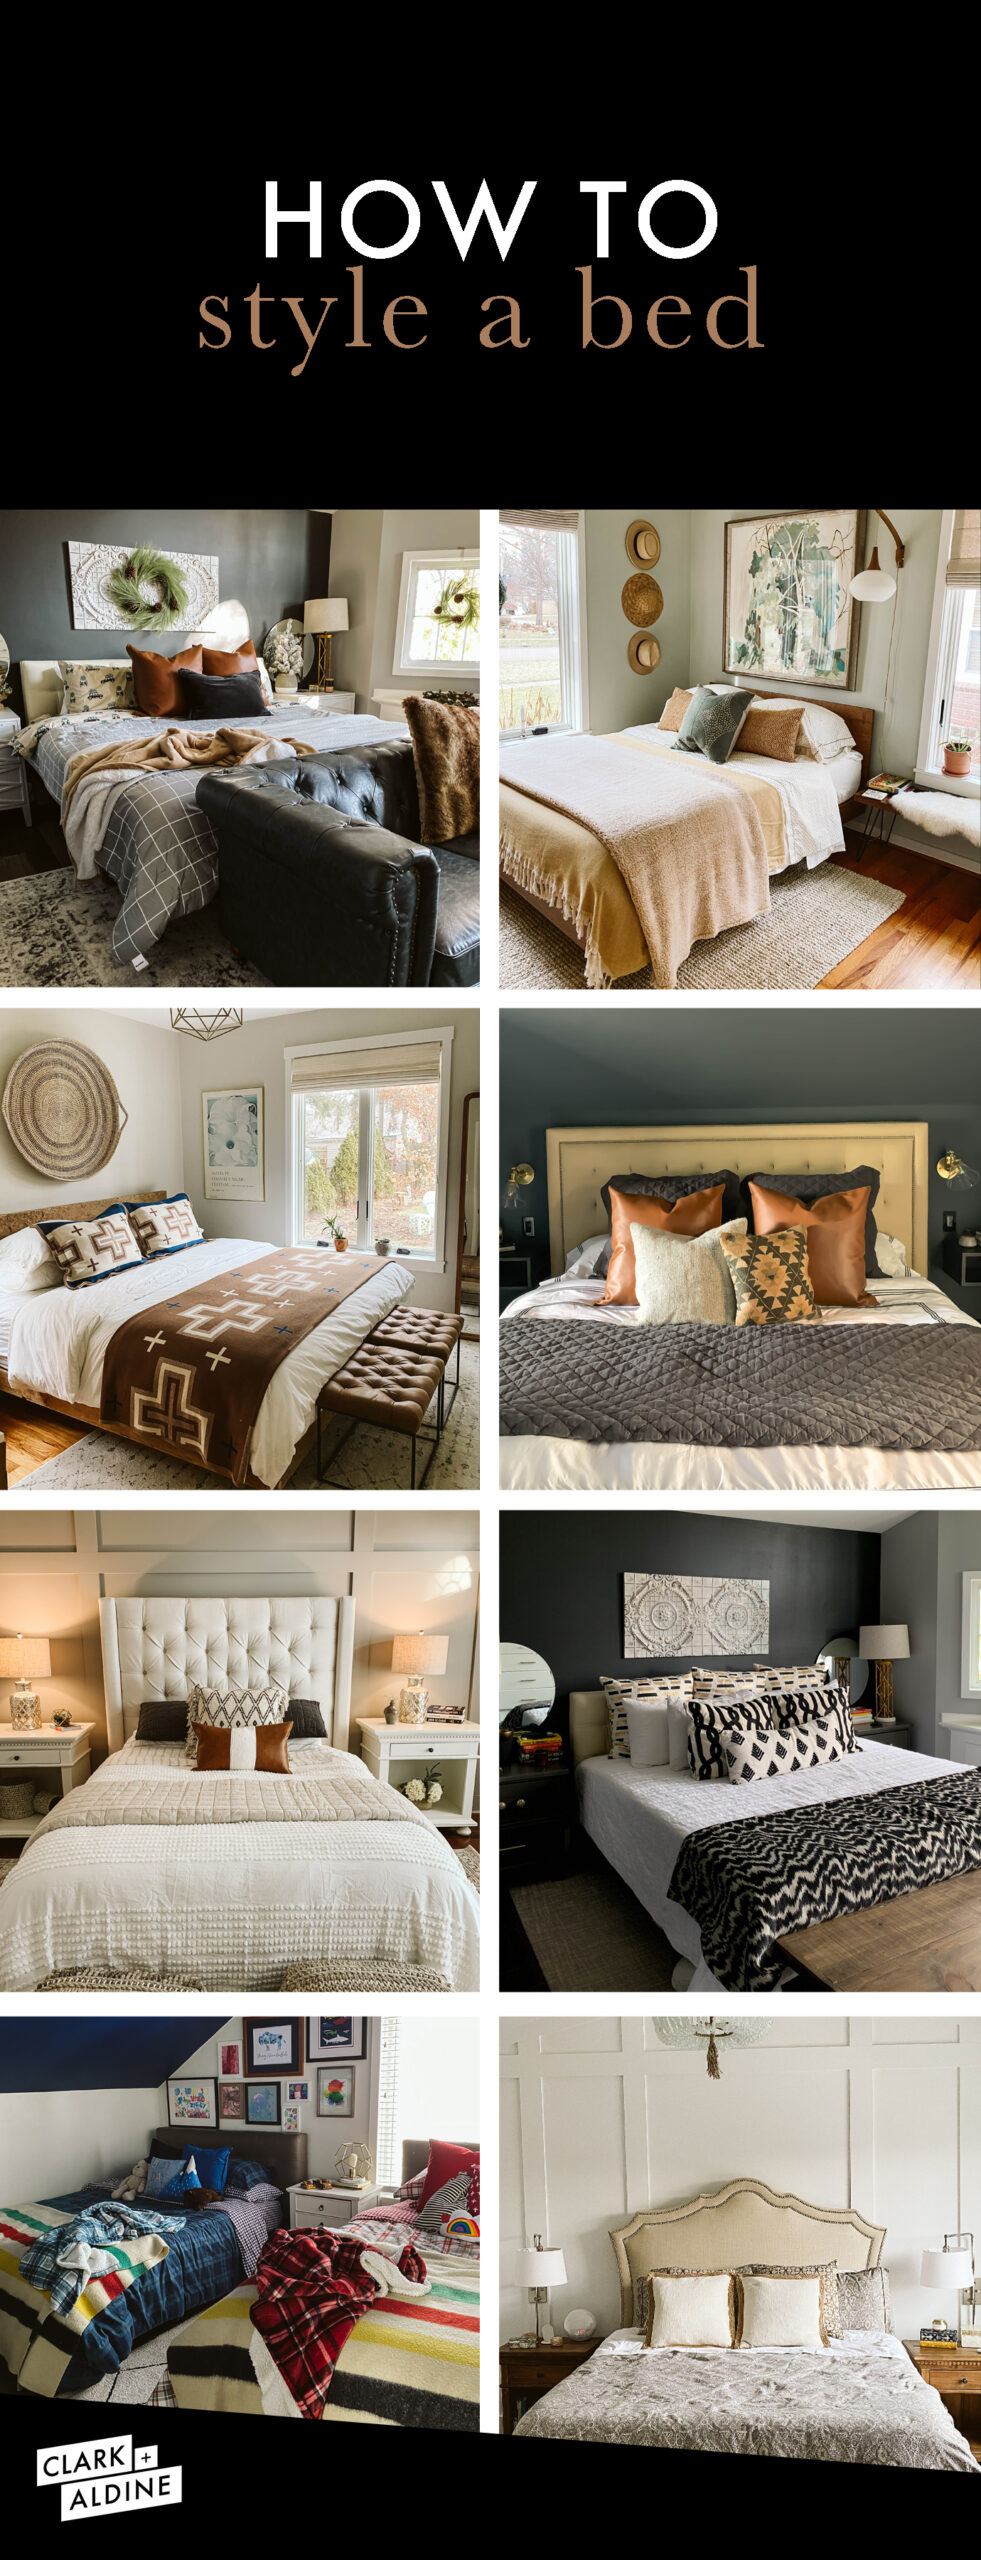 5 WAYS TO DESIGN A BED RIGHT FOR YOU image 4